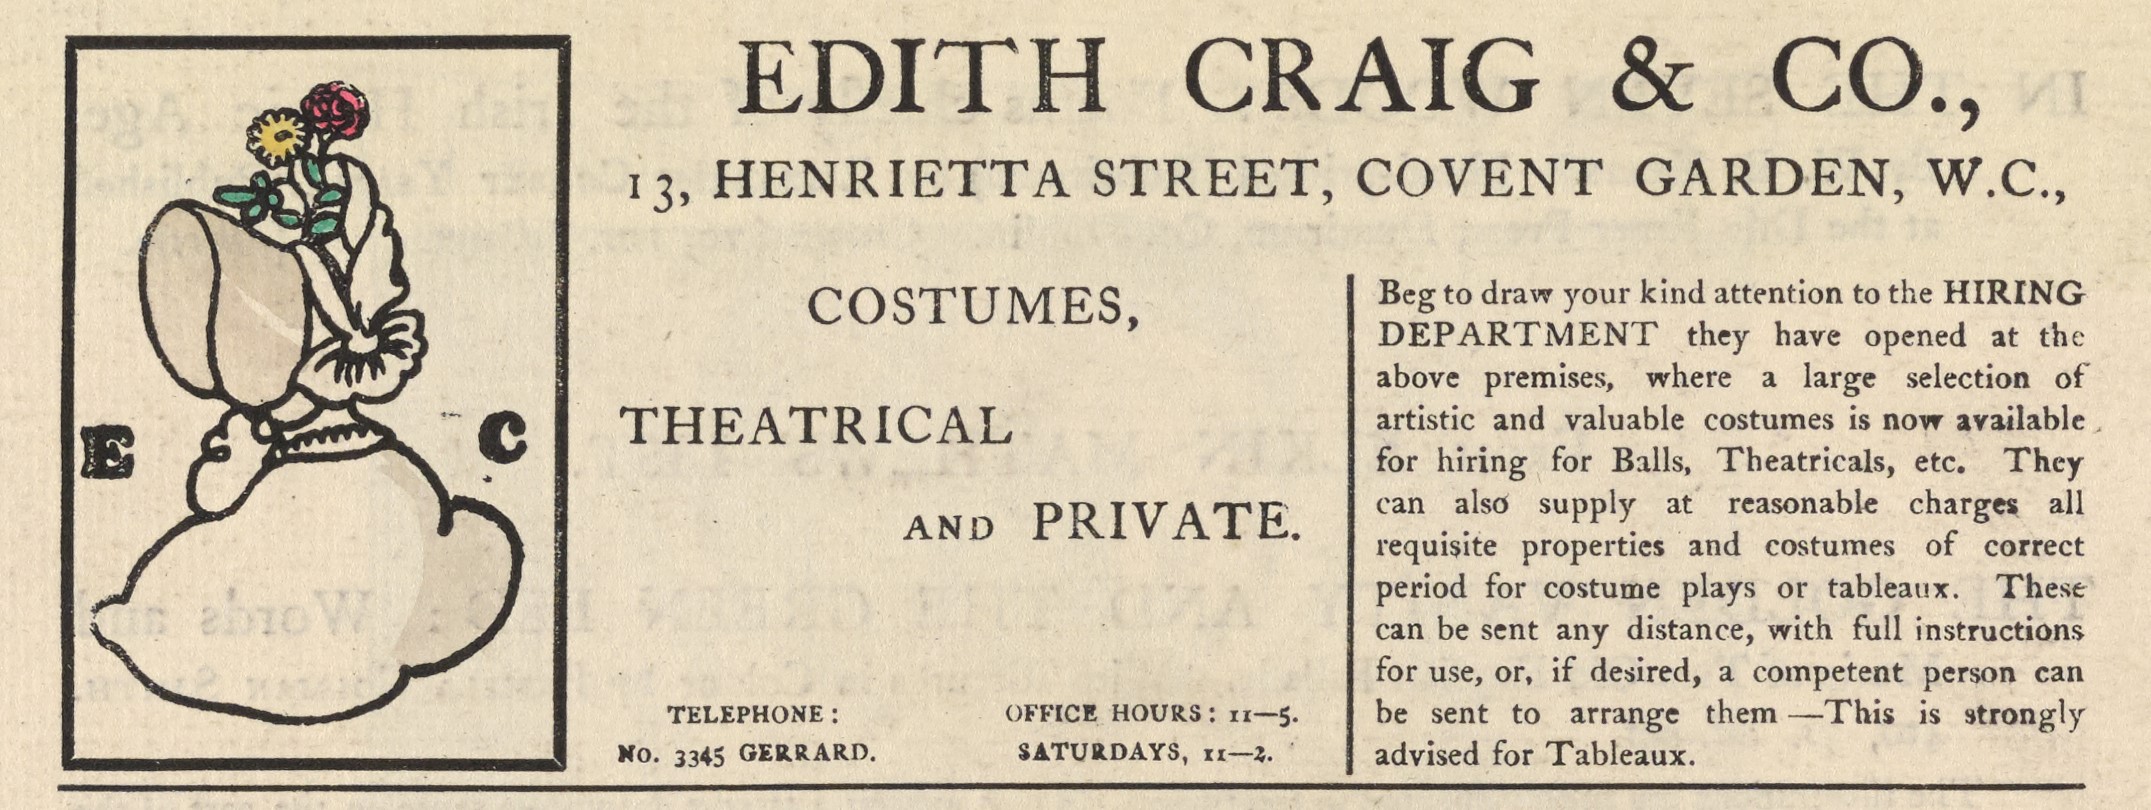 The illustrated advertisement occupies the top third of the page of advertisements. The ad is titled “Edith Craig & Co.,” in a large serif font. Below the title, an address is printed: “13, Henrietta Street, Covent Garden, W.C.” To the left of the text is a small, coloured illustration with a black rectangular frame. It depicts a woman from the shoulders up, in profile, wearing a bonnet that hides her face. The bonnet is decorated with a pale yellow ribbon on the side and has two flowers with green leaves – a yellow daisy and a red rose – emerging from its top. The bonnet and the edge of her dress are coloured grey. The initials “E” and “C” are positioned to either side of the woman, in a heavy serif font. The text of the ad is divided into two columns beneath the title and address, and reads “Costumes, theatrical and private. Telephone: No. 3345 Gerrard. Office hours: 11-5. Saturdays, 11-2. Beg to draw your attention to the HIRING DEPARTMENT they have opened at the above premises, where a large selection of artistic and valuable costumes is now available for hiring for Balls, Theatricals, etc. They can also supply at reasonable charges all requisite properties and costumes of correct period for costume plays or tableaux. These can be sent any distance, with full instructions for use, or, if desired, a competent person can be sent to arrange them.—This is strongly advised for Tableaux.”